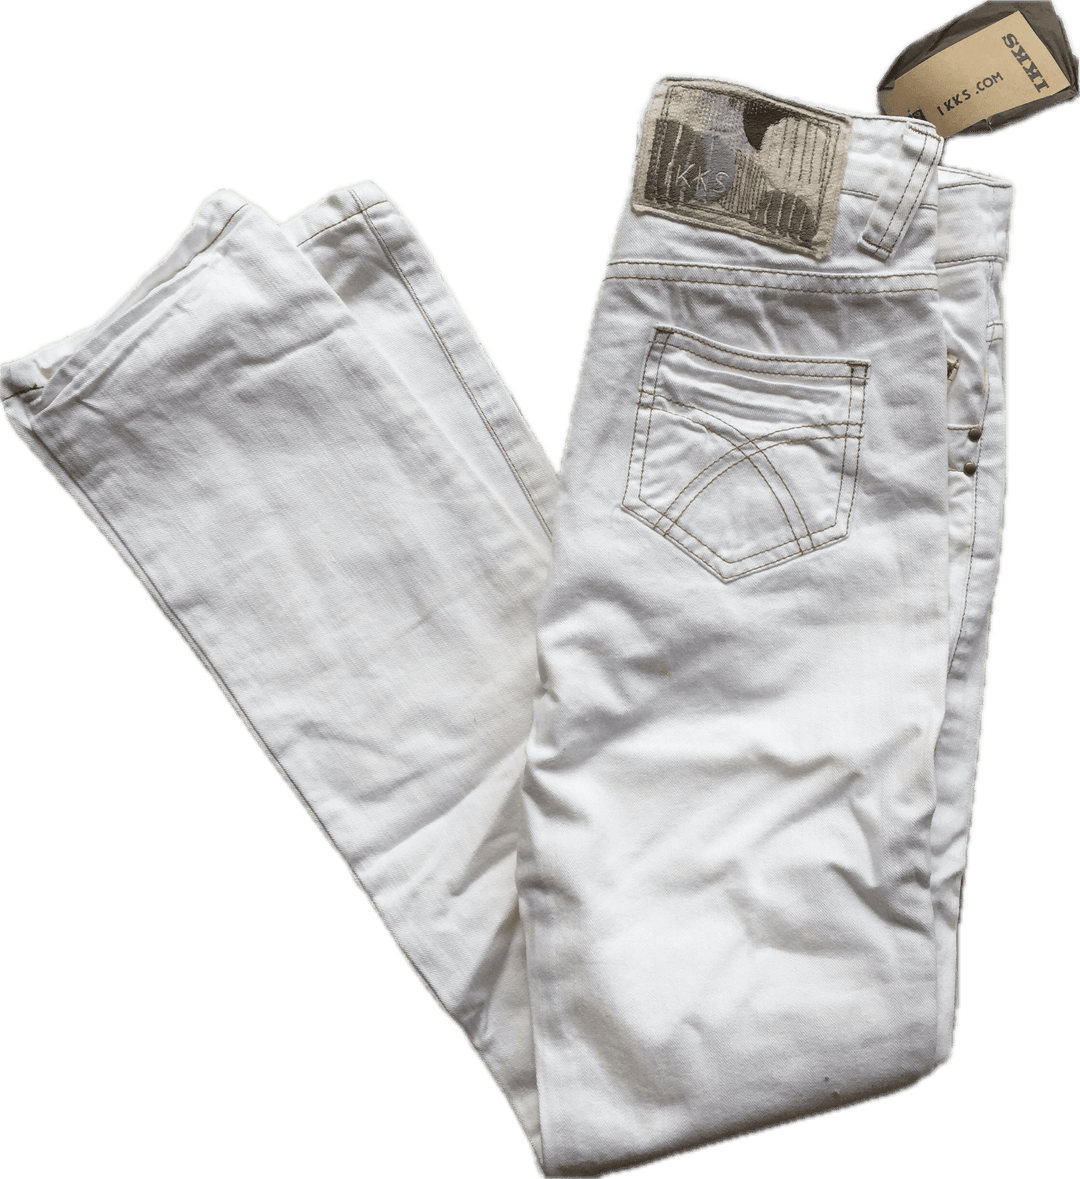 NWT - IKKS White Low Rise Skinny Jeans- Size 23 - Jean Pool